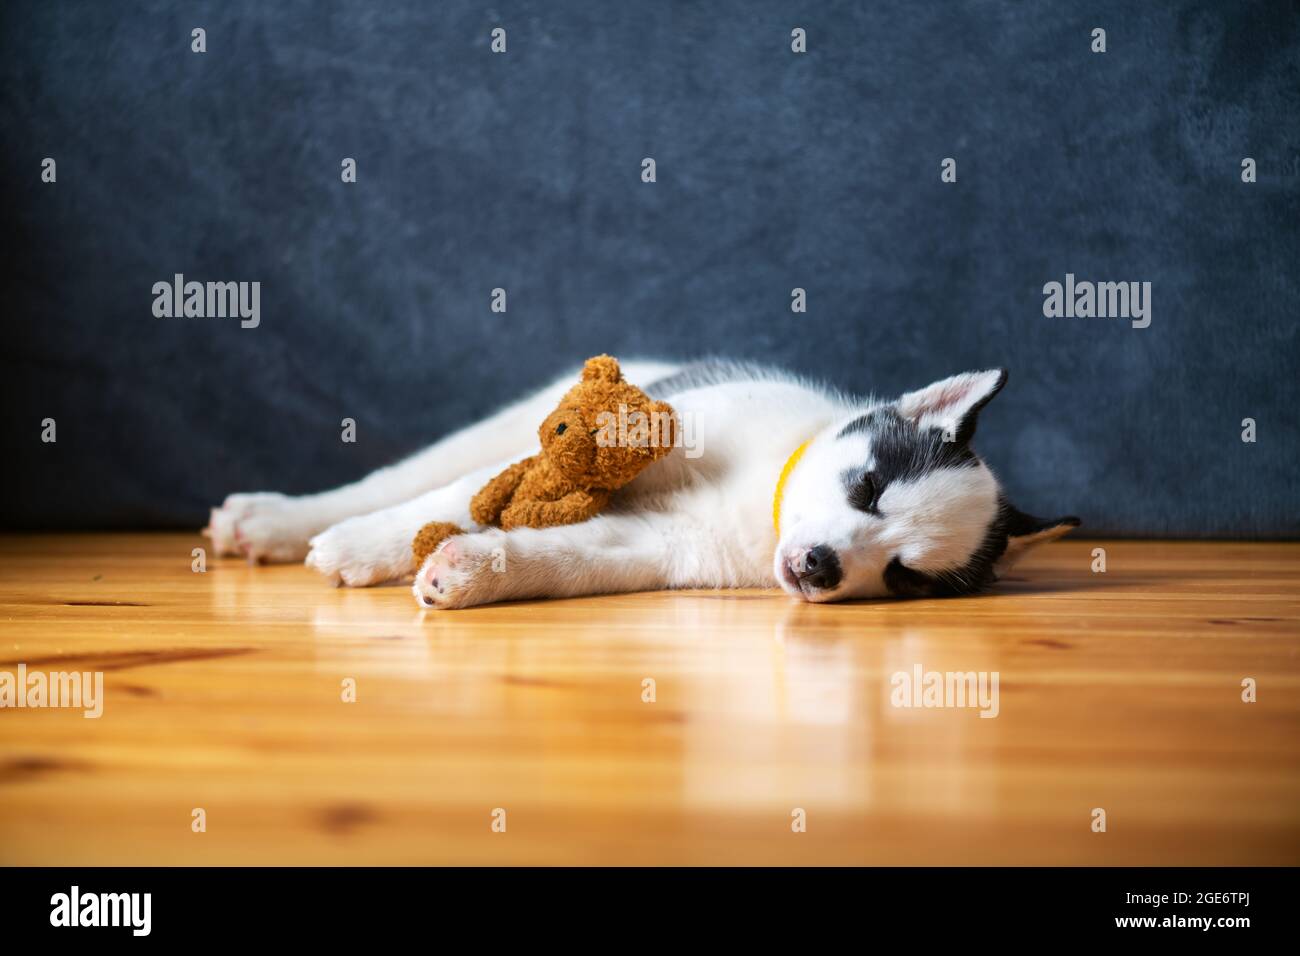 A small white dog puppy breed siberian husky with beautiful blue eyes lays on wooden floor with teddy bear toy. Dogs and pets photography Stock Photo